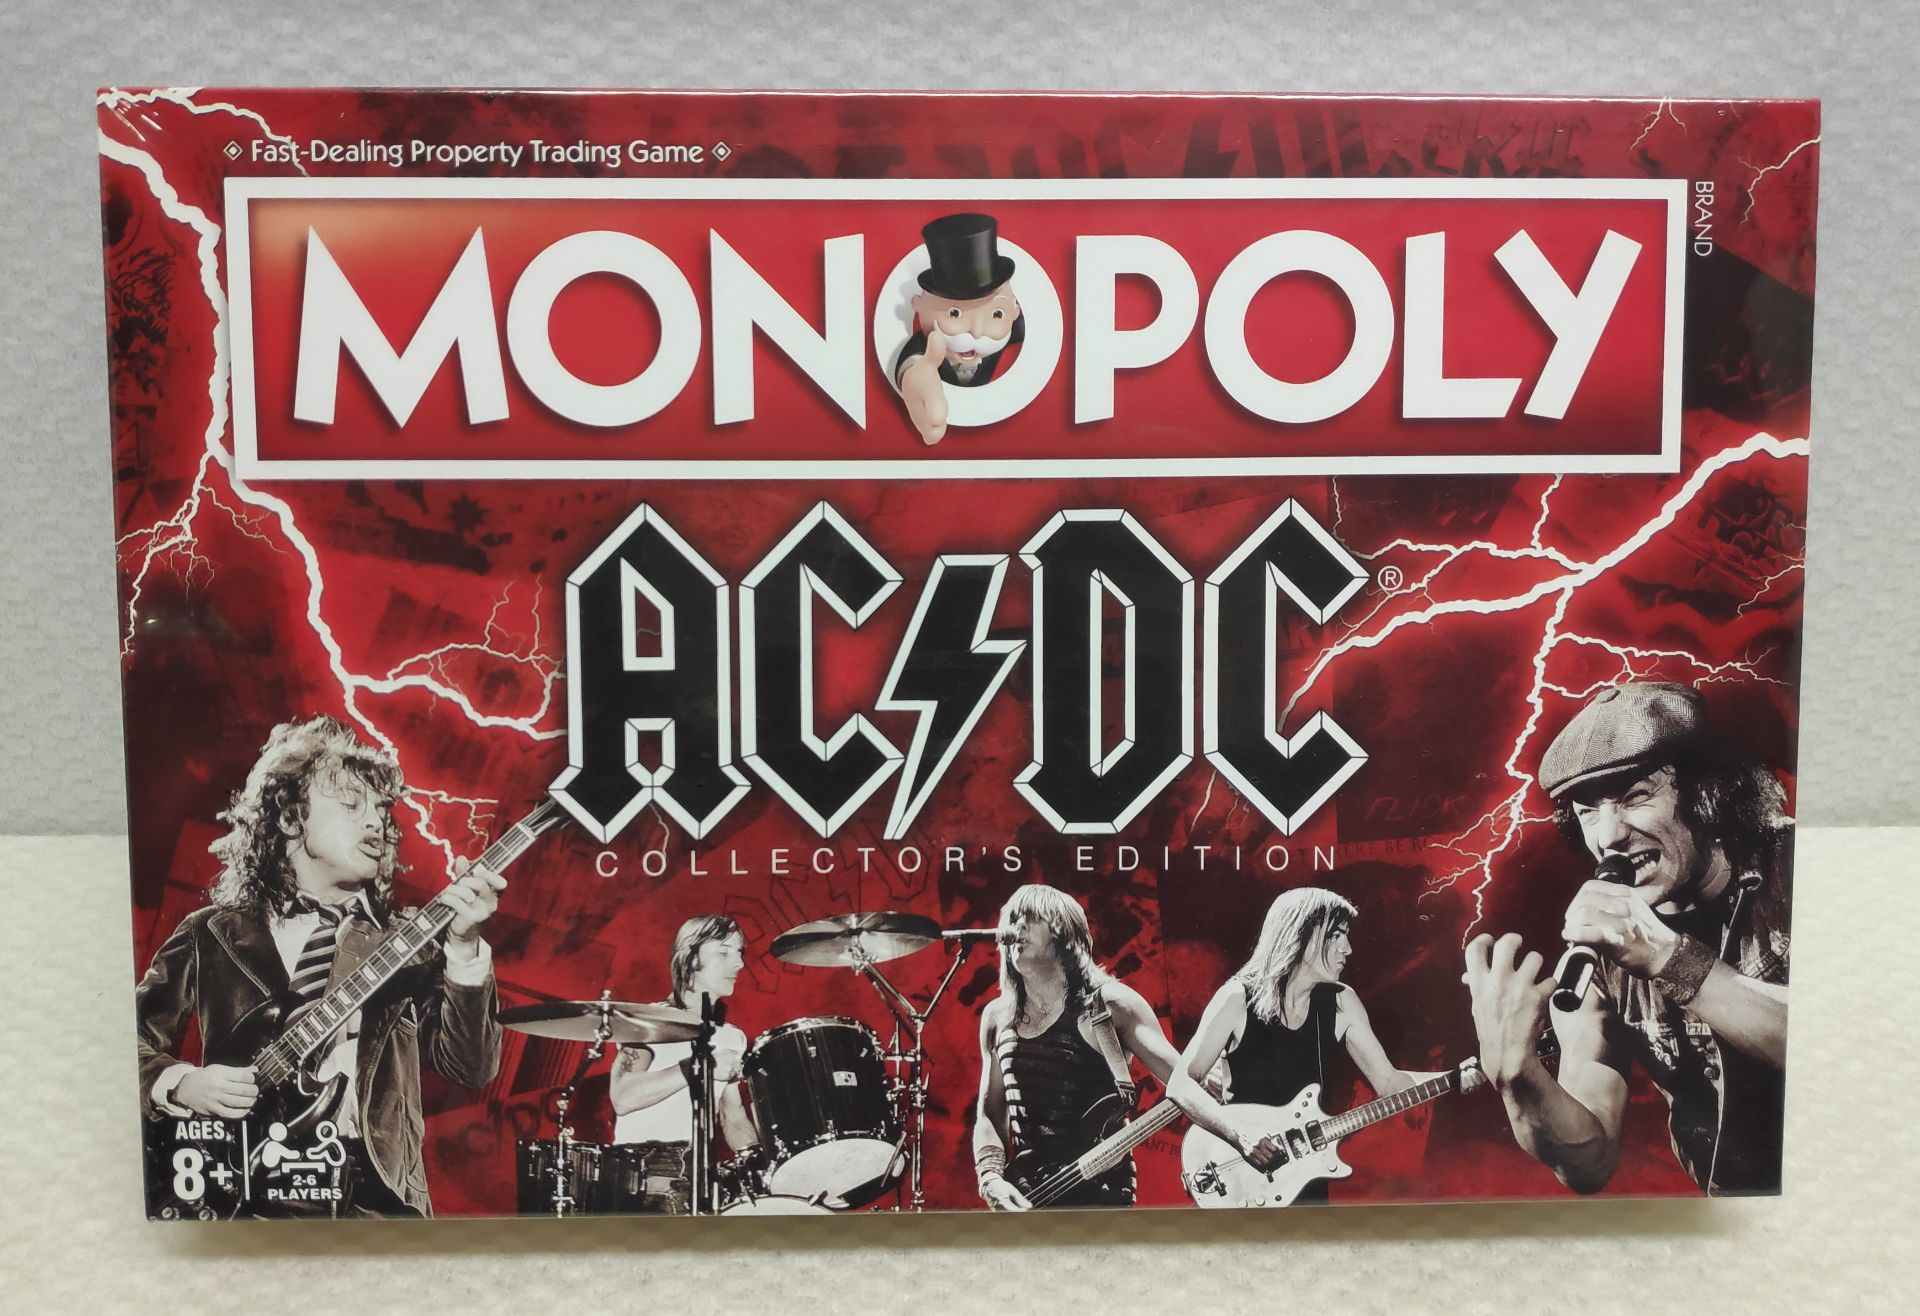 1 x AC/DC Collector's Edition Monopoly - New/Sealed